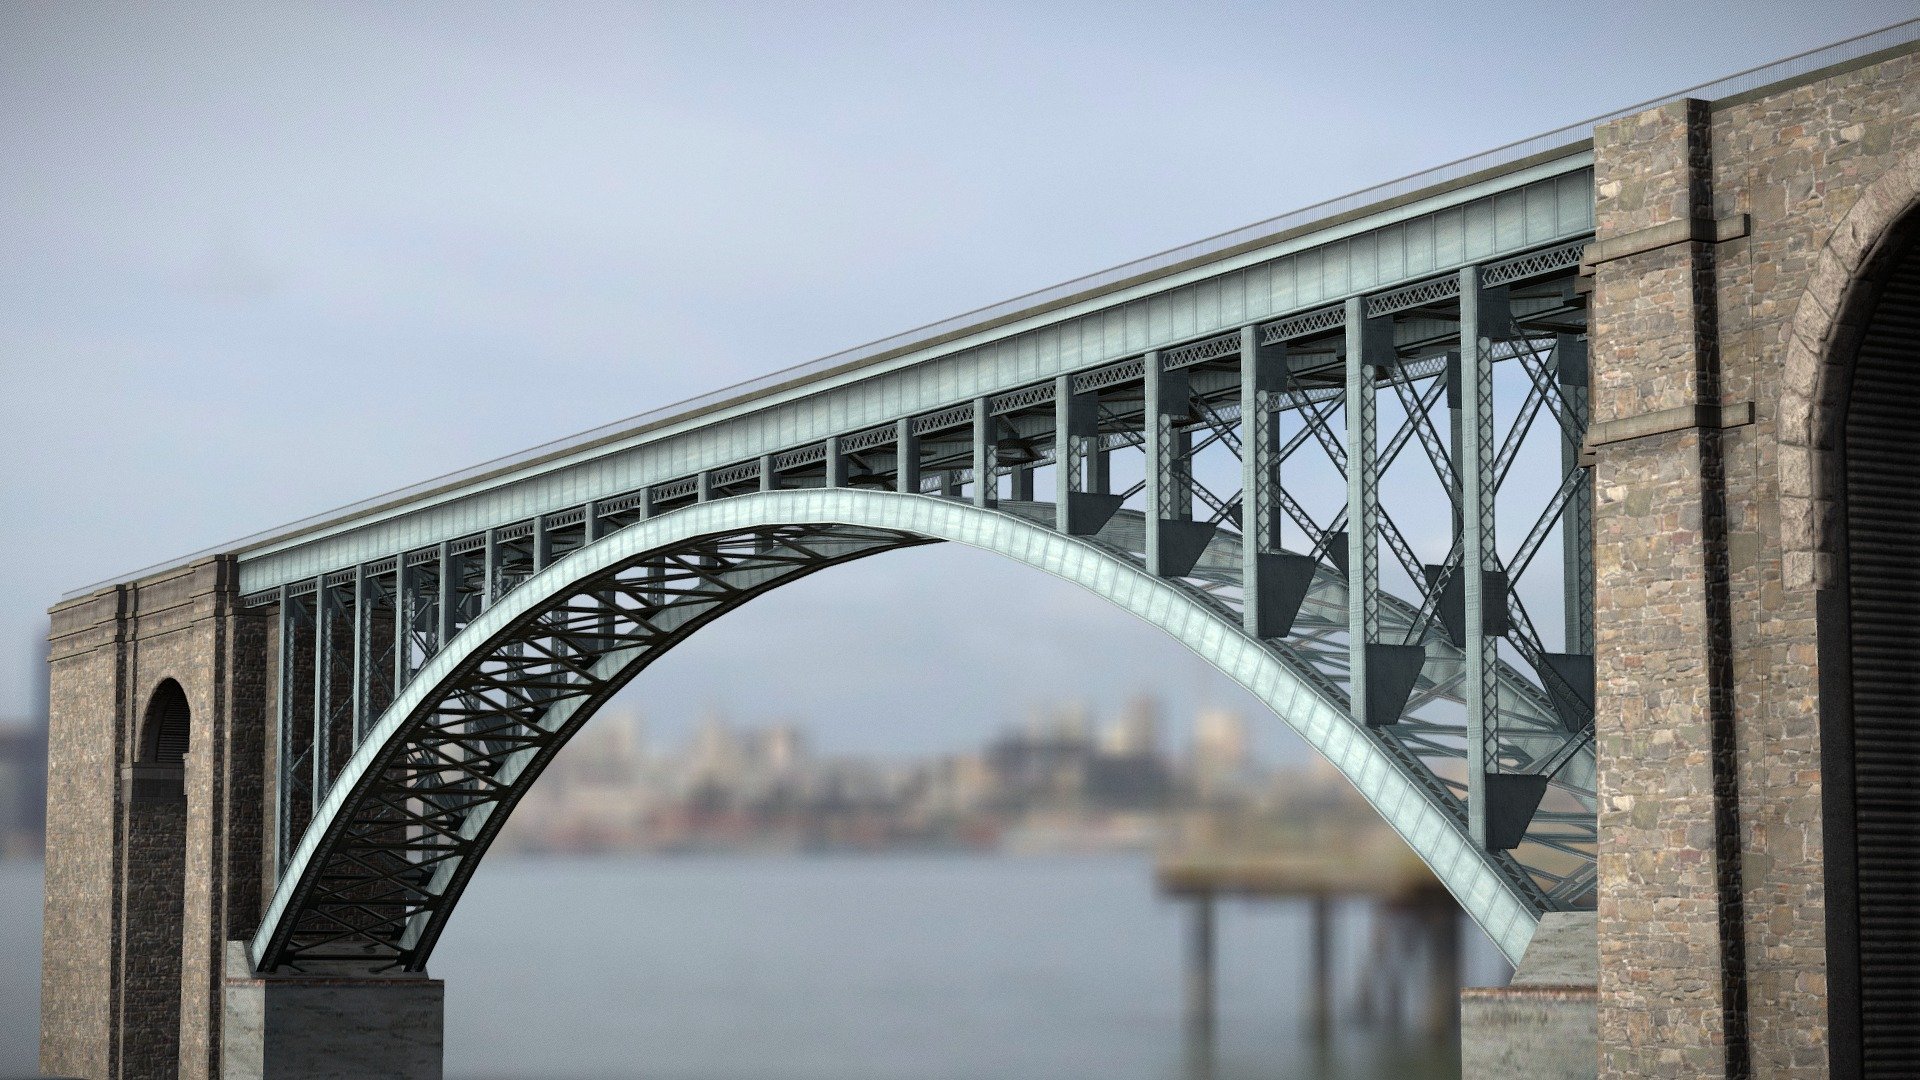 Harlem River Dr, New York, NY 10033, United States

A Low poly, PBR recreation of the famous bridge and landmark, the High Bridge. The High Bridge is the oldest bridge in all of NYC and connects the neighborhoods of Washington Heights and the Bronx. Enjoy and have a nice day. 👍

Formats:

.obj
.blend - NYC, The High Bridge - Download Free 3D model by 99.Miles 3d model